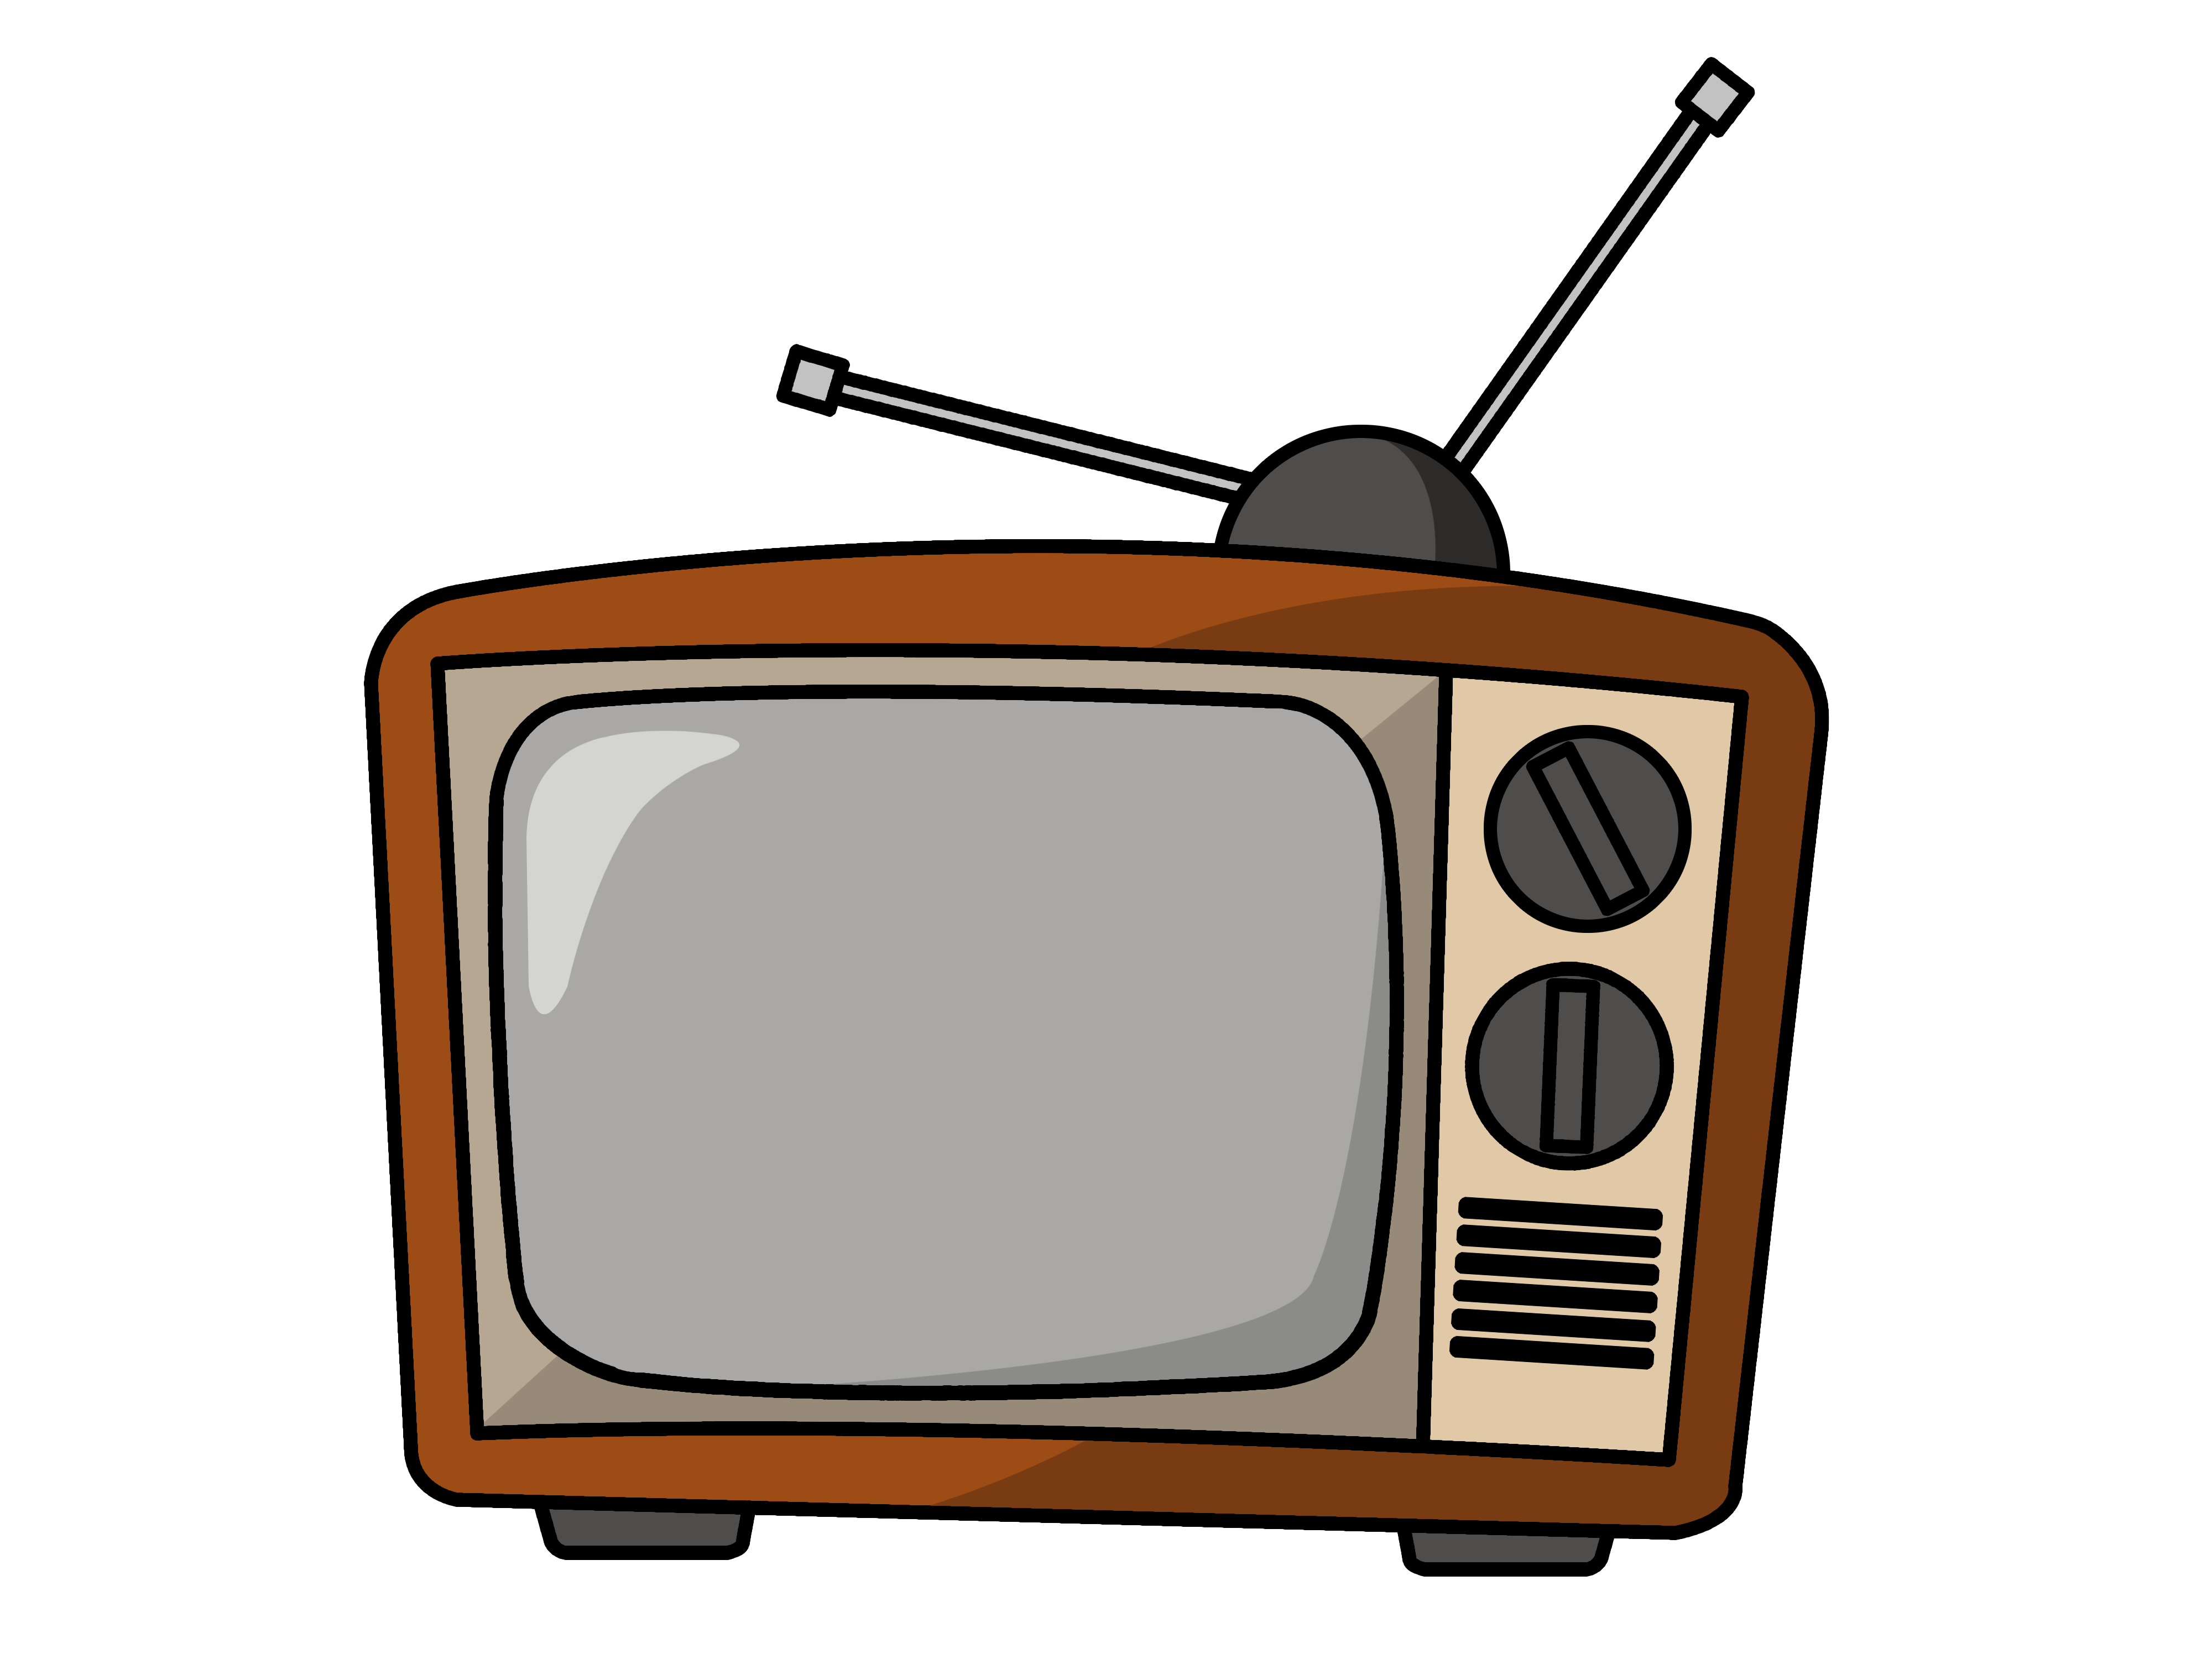 Pictures of televisions clipart - ClipartFox